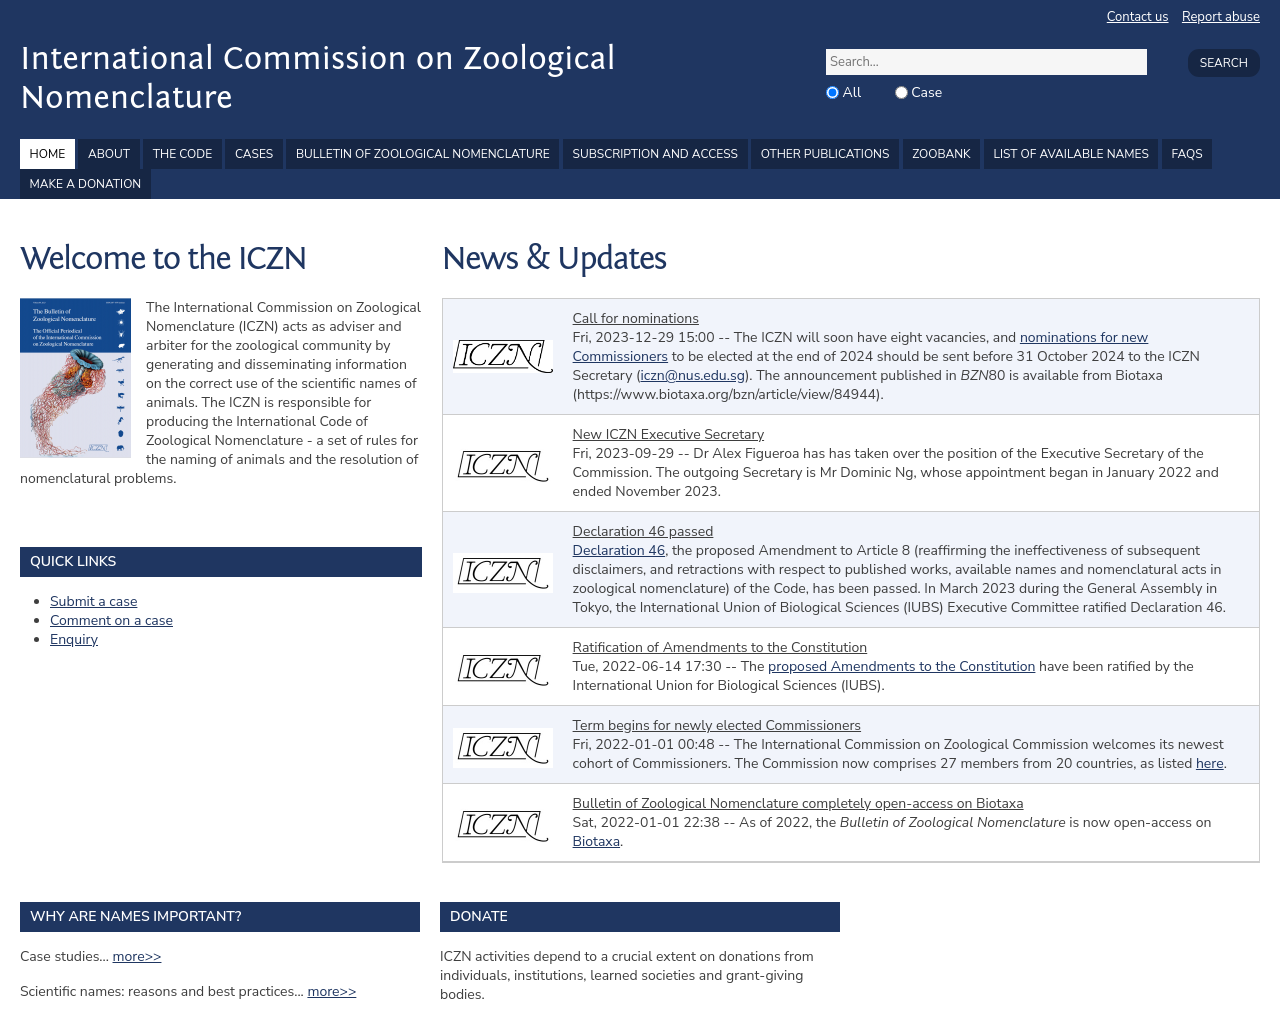 iczn.org